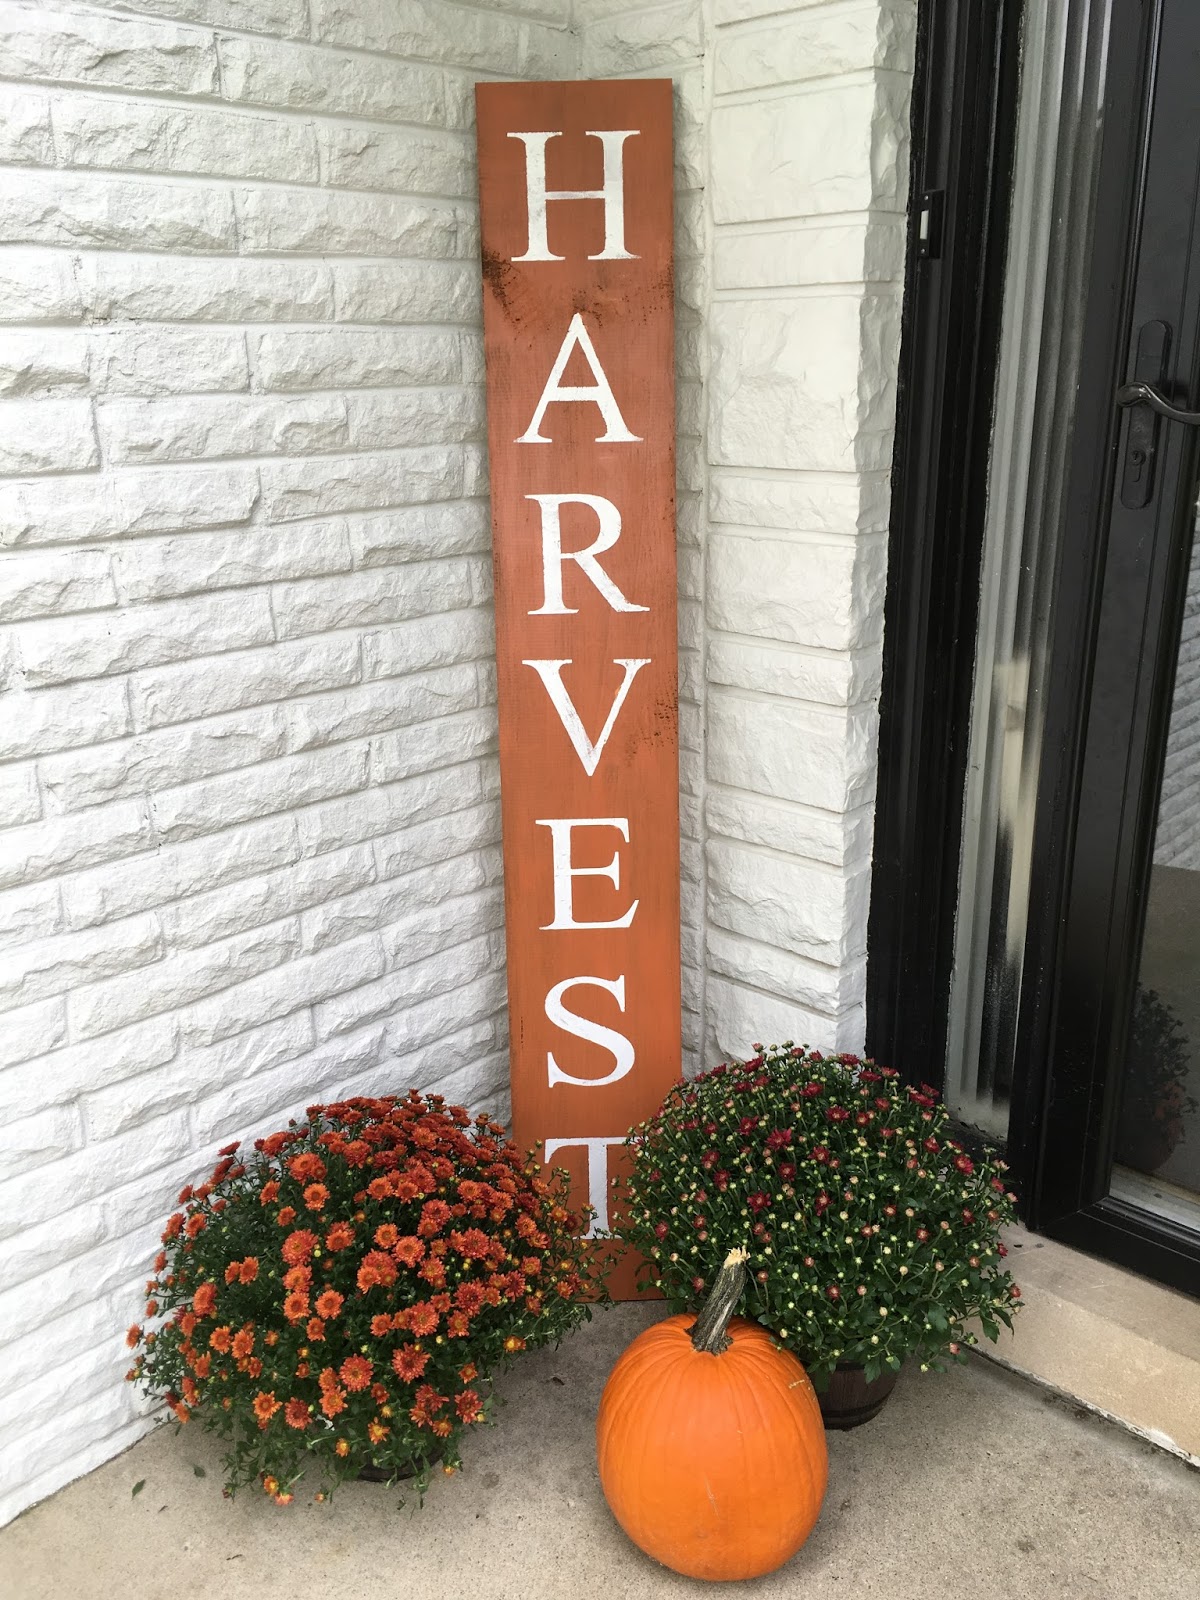 This Happy Life: $12 Harvest Sign